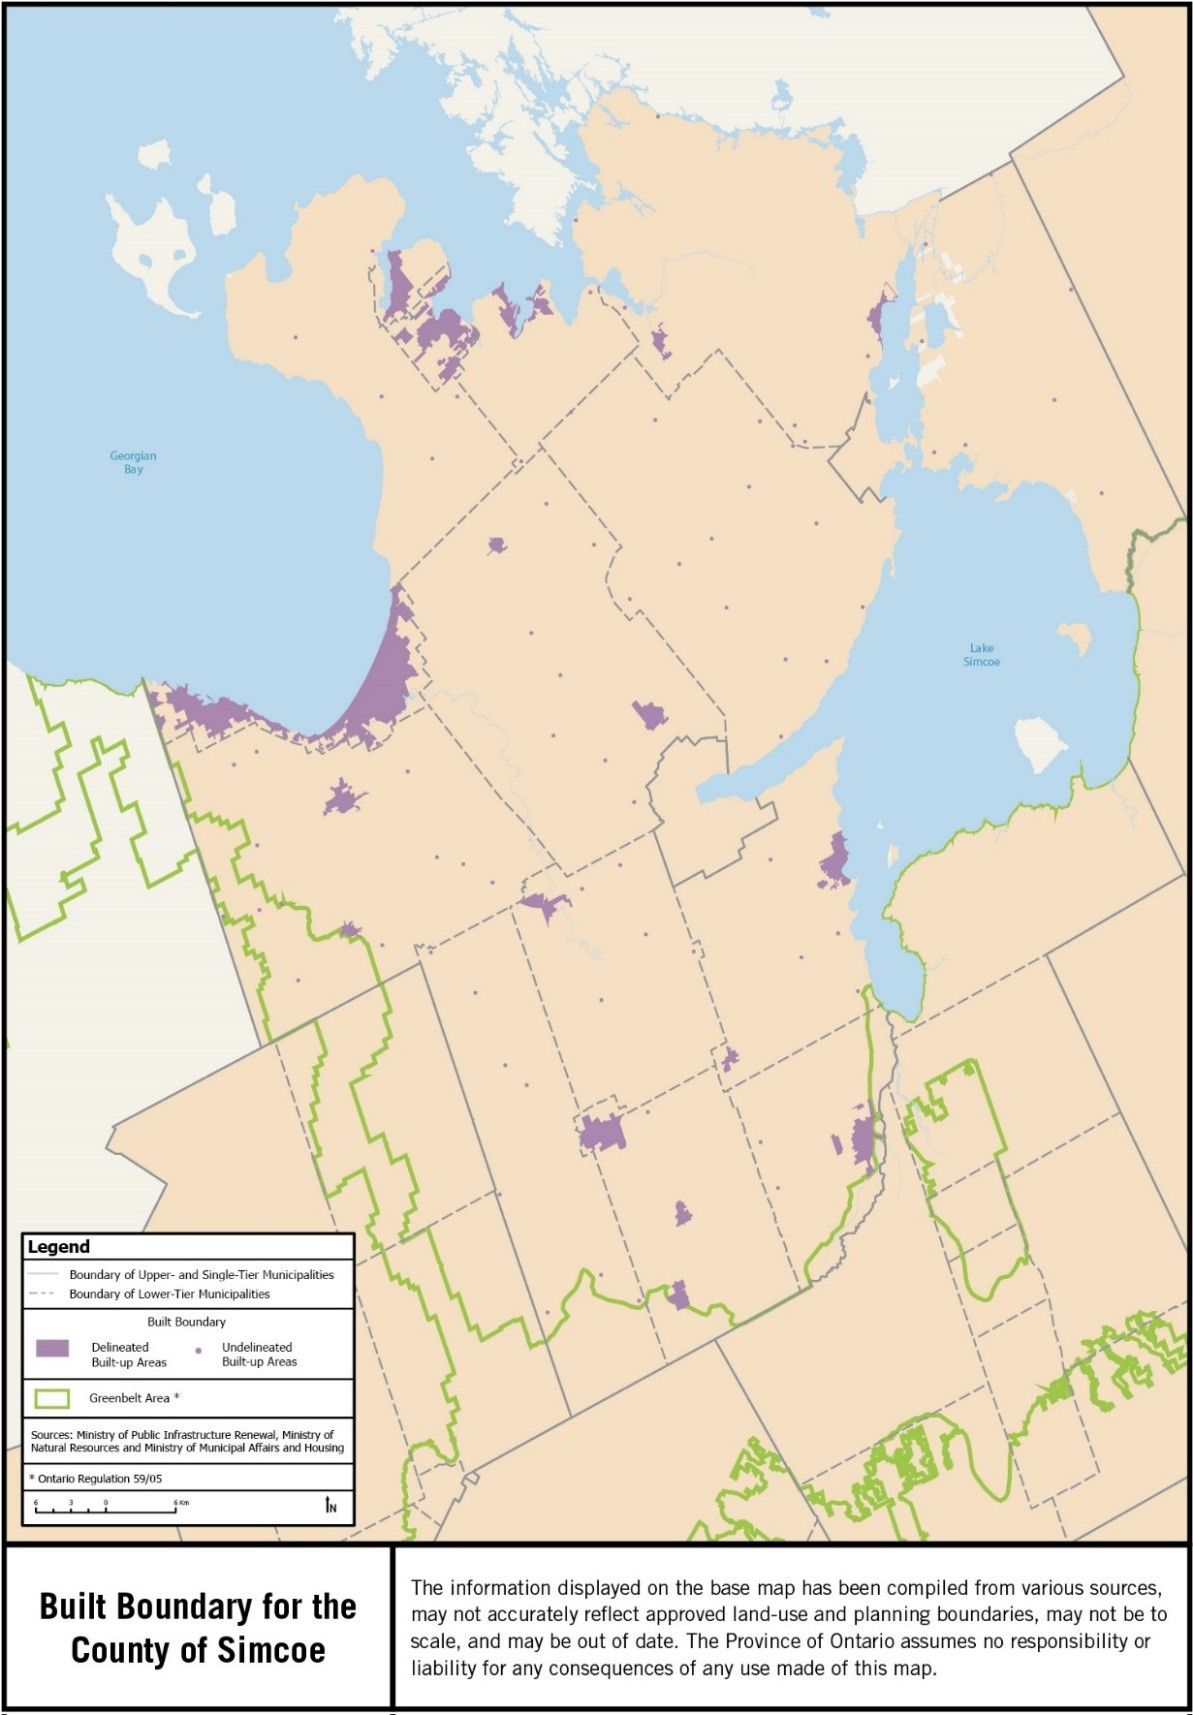 Map showing the built boundary for the County of Simcoe.